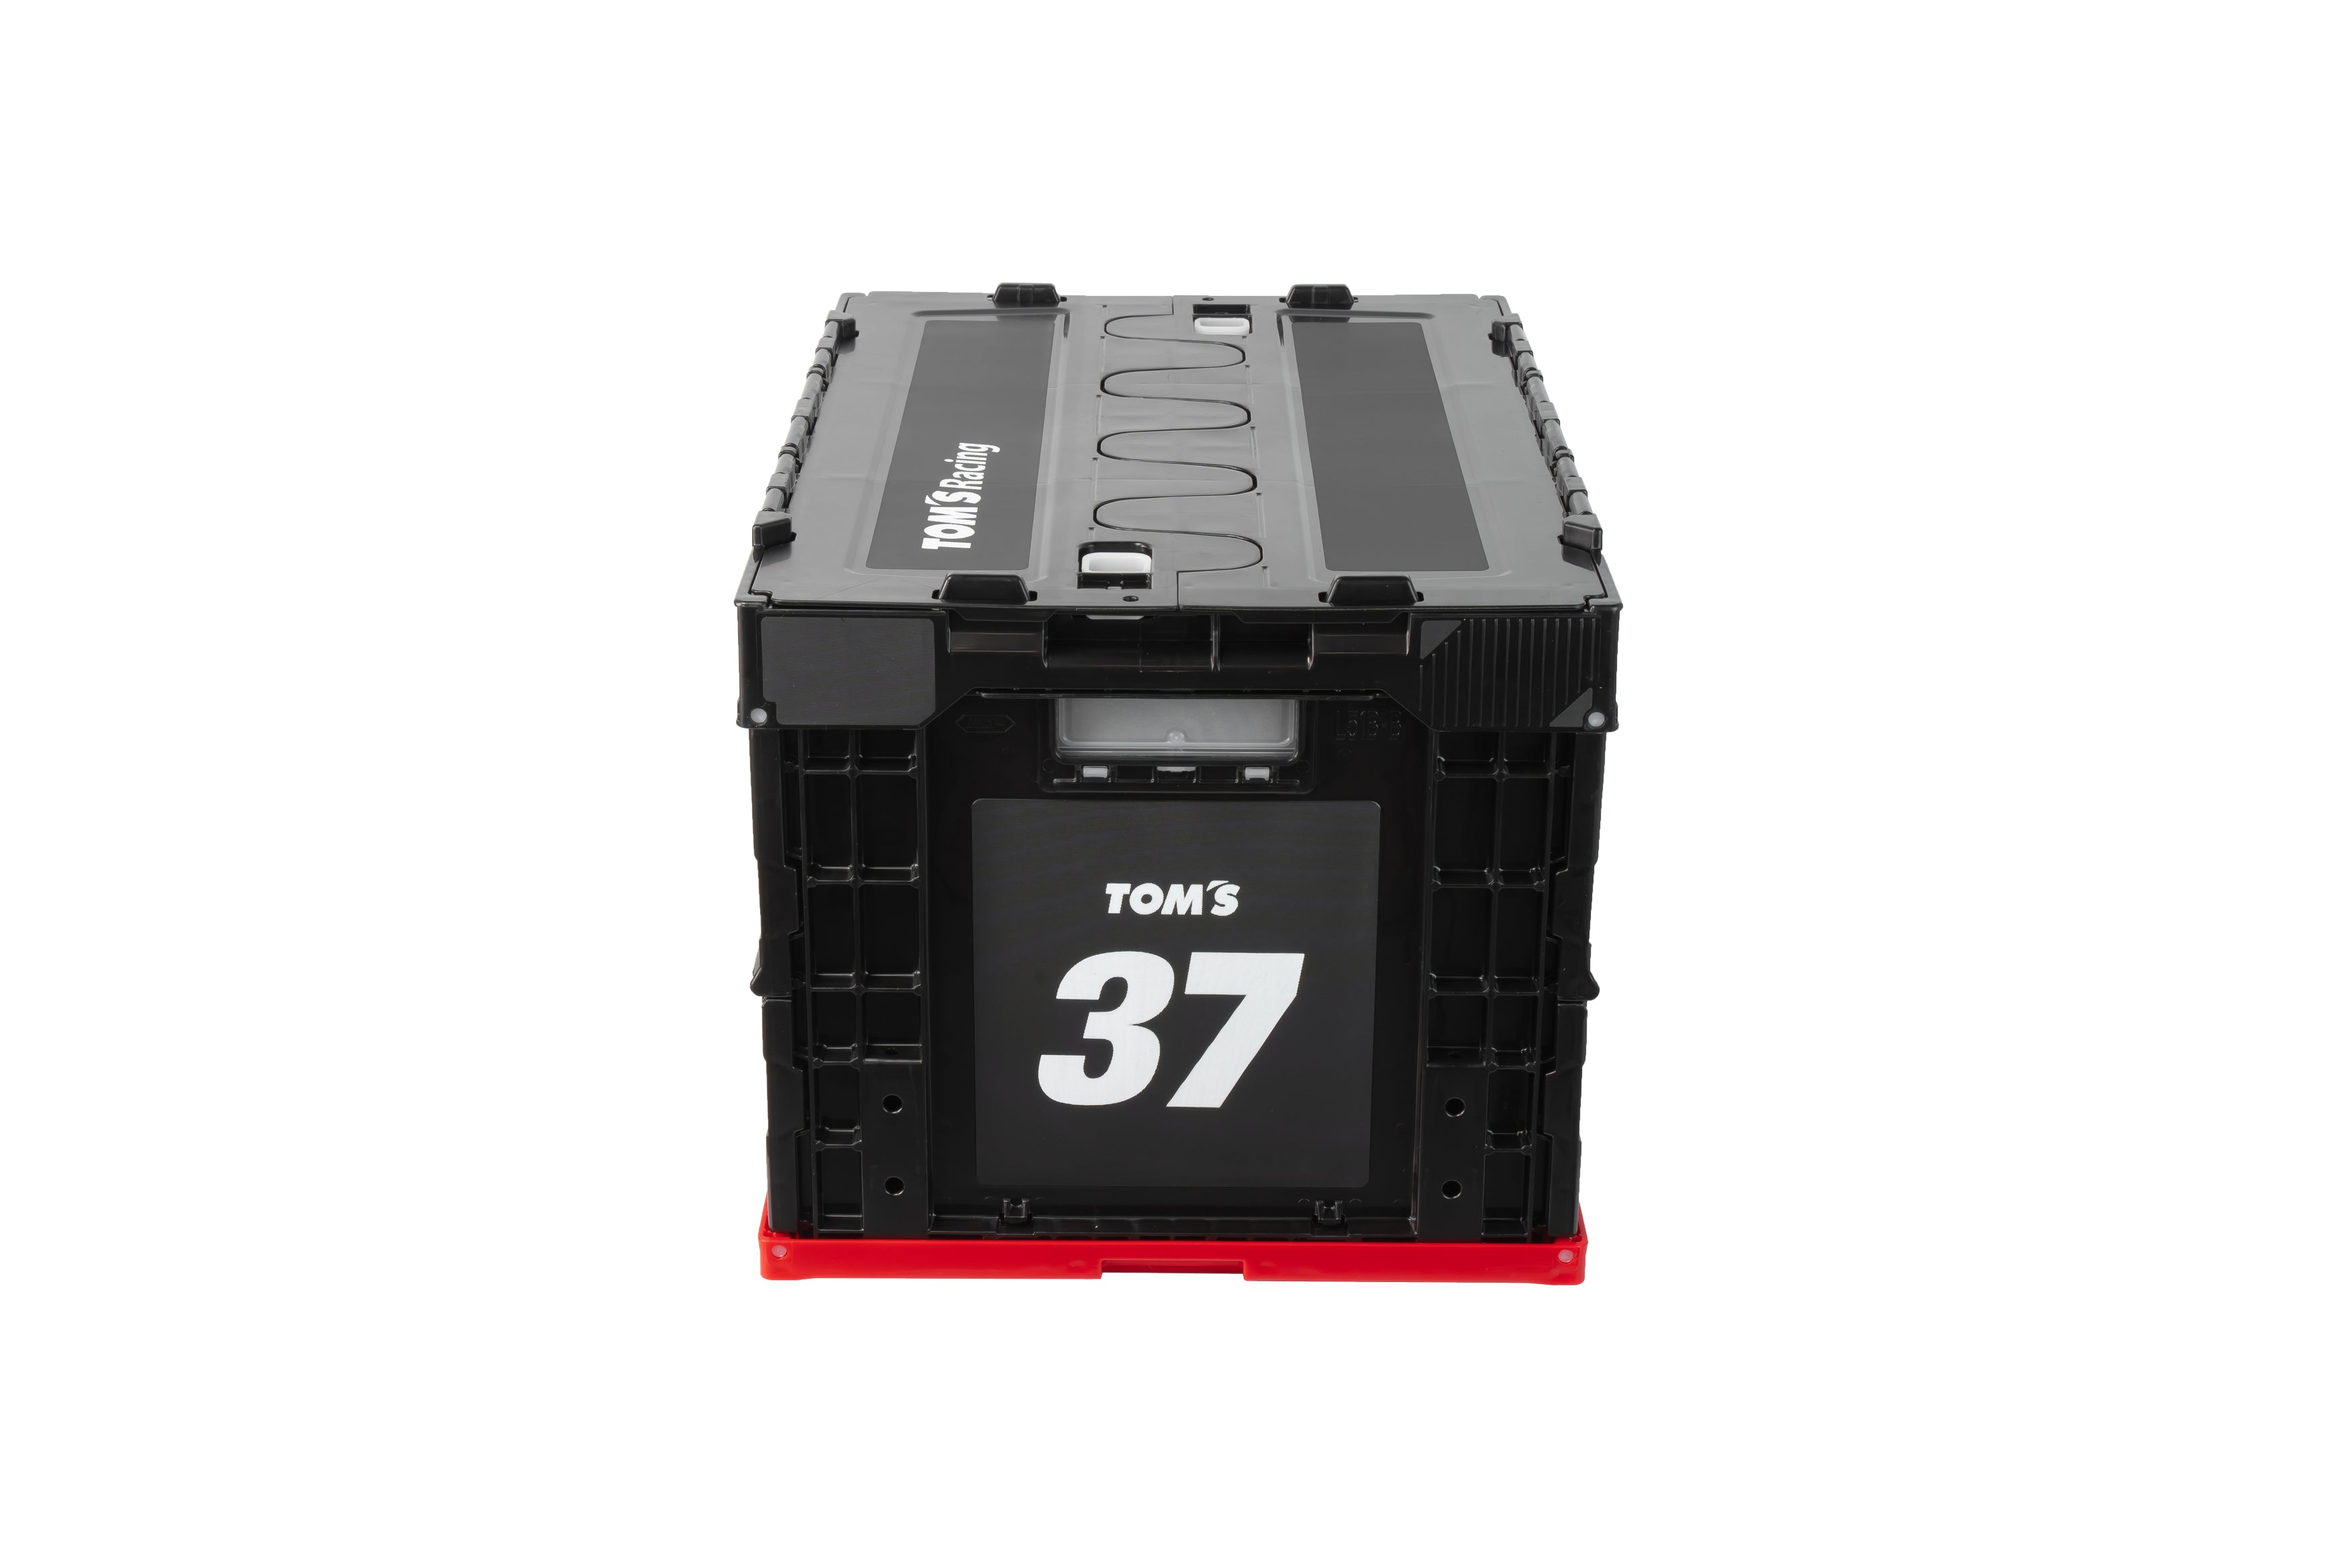 TOM'S Racing - Tote Container Box 2022 (Large-50L)